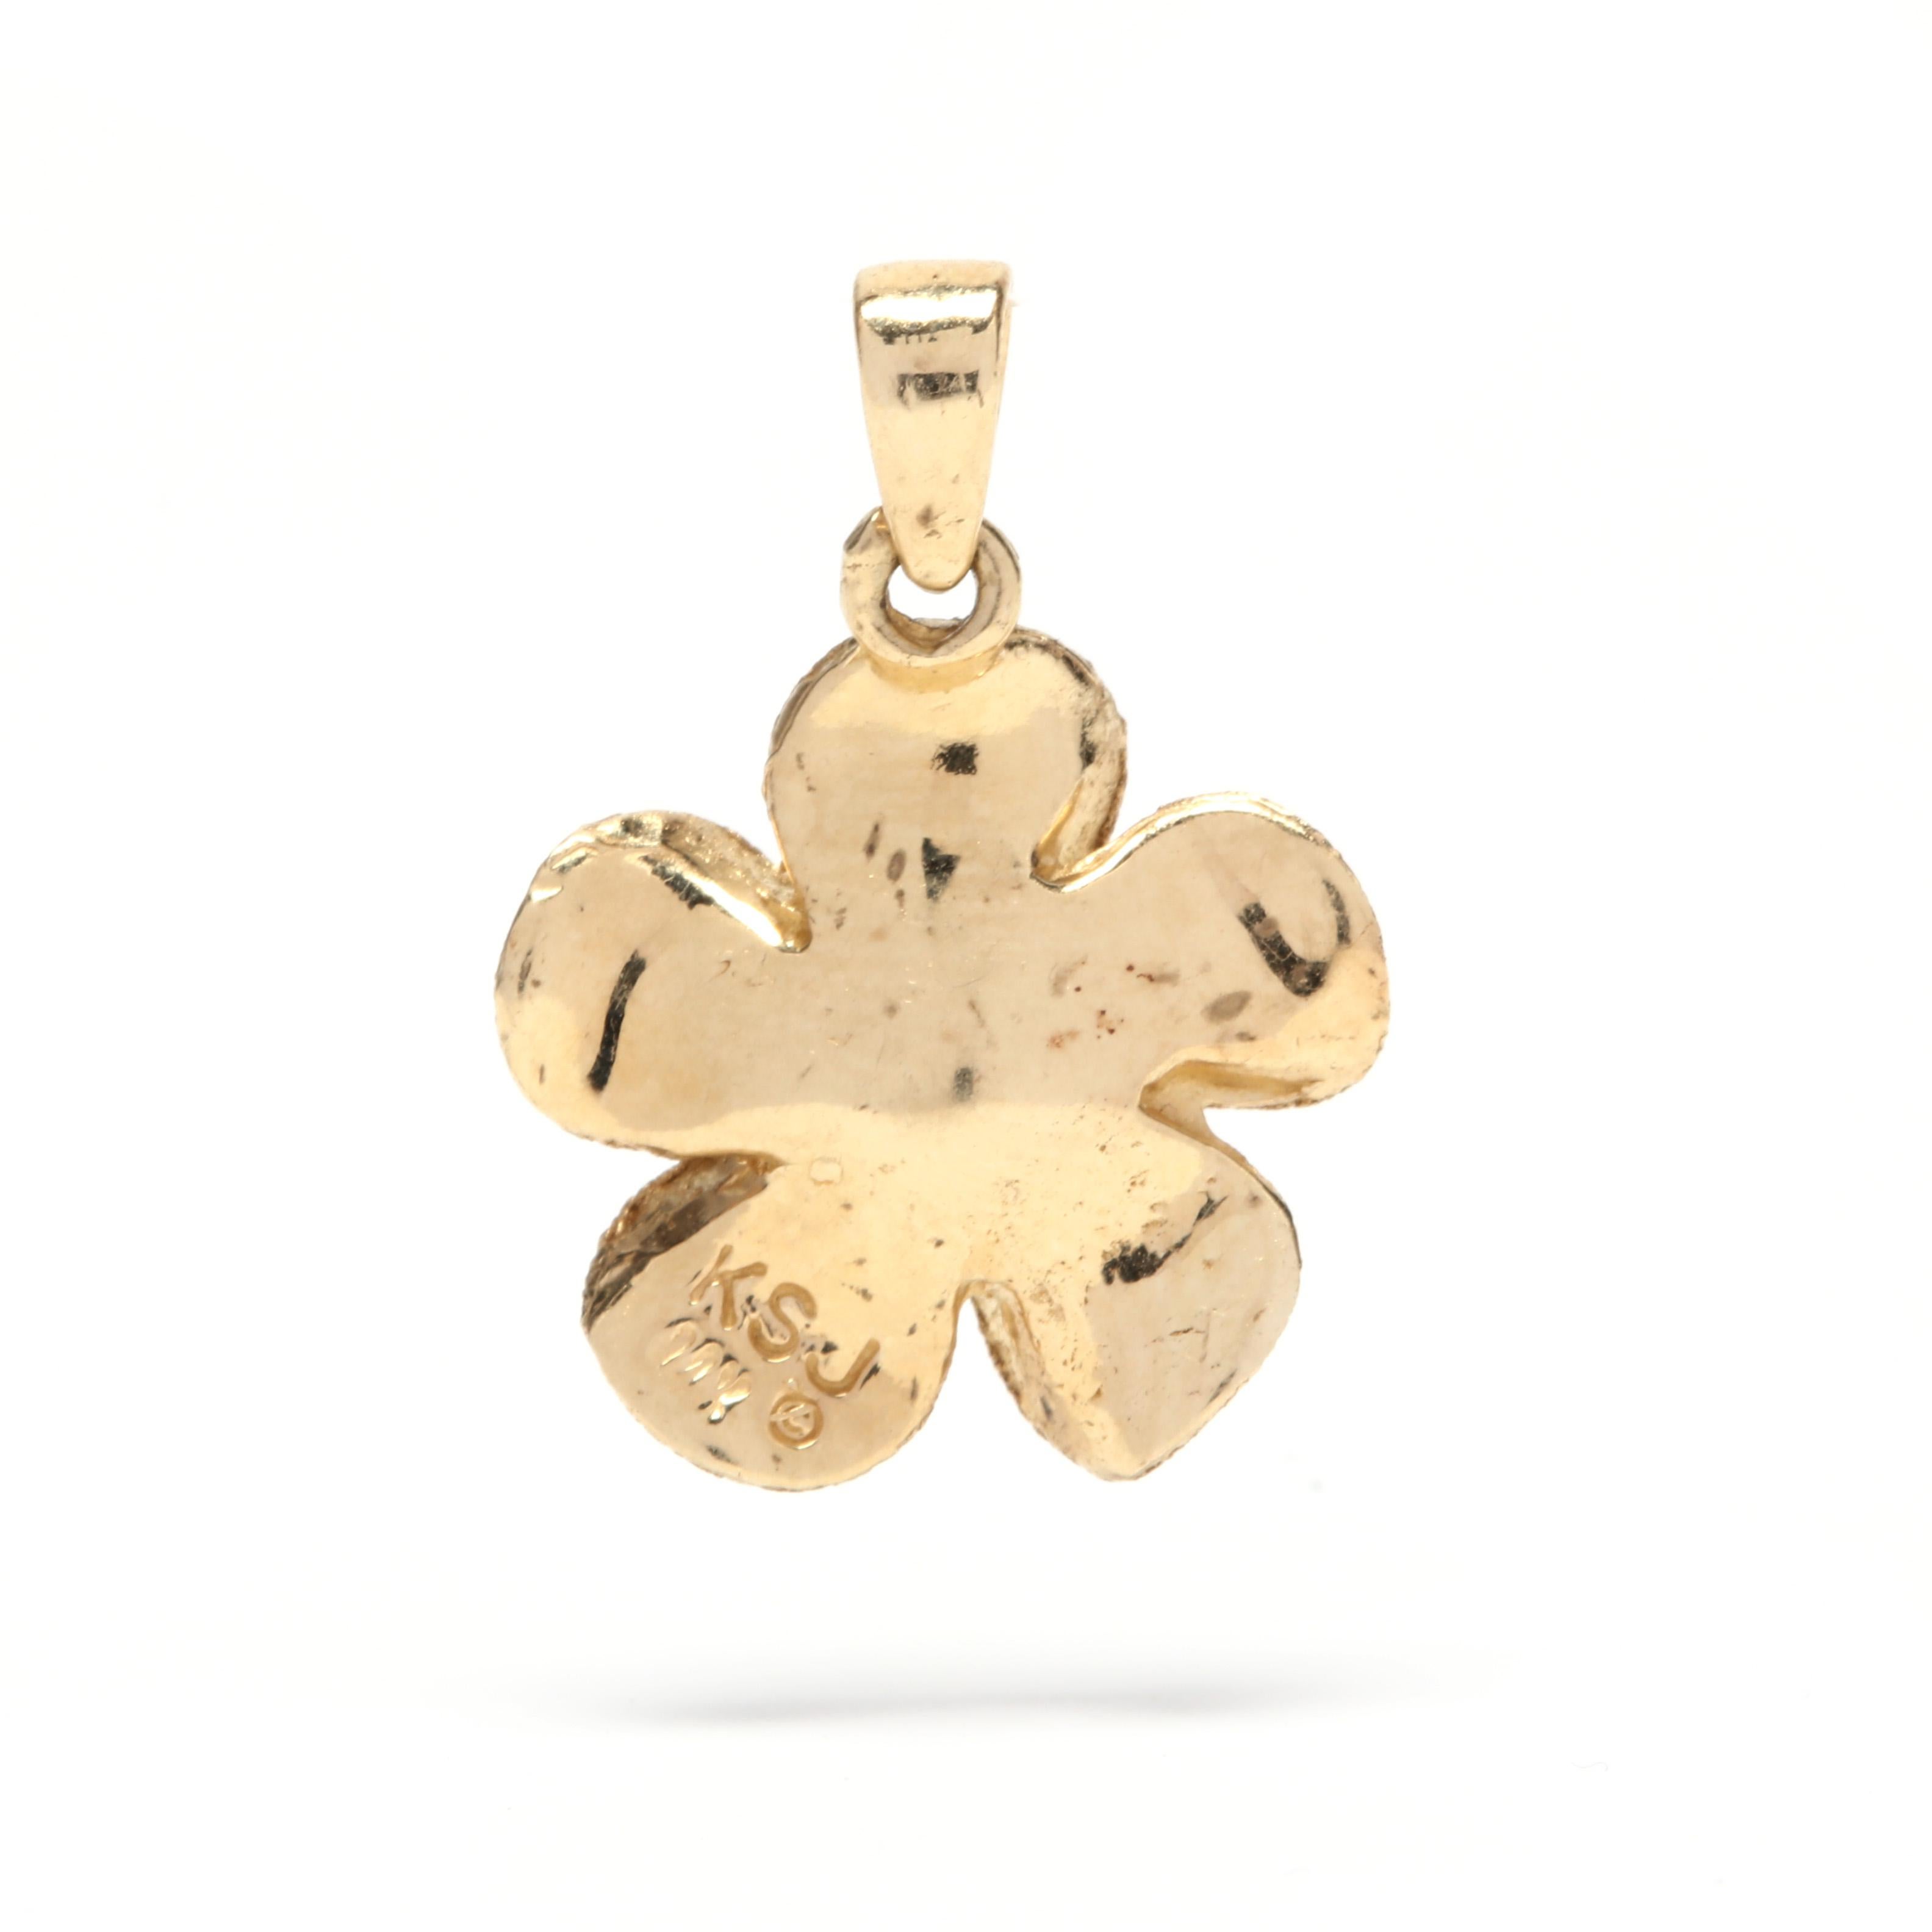 A 14 karat yellow gold and diamond flower charm / pendant. A five petal flower motif with a central, prong set full cut round diamond weighing approximately .11 carat and with a textured finish.

Stone:
- diamond
- full cut round, 1 stone
- 3 mm
-